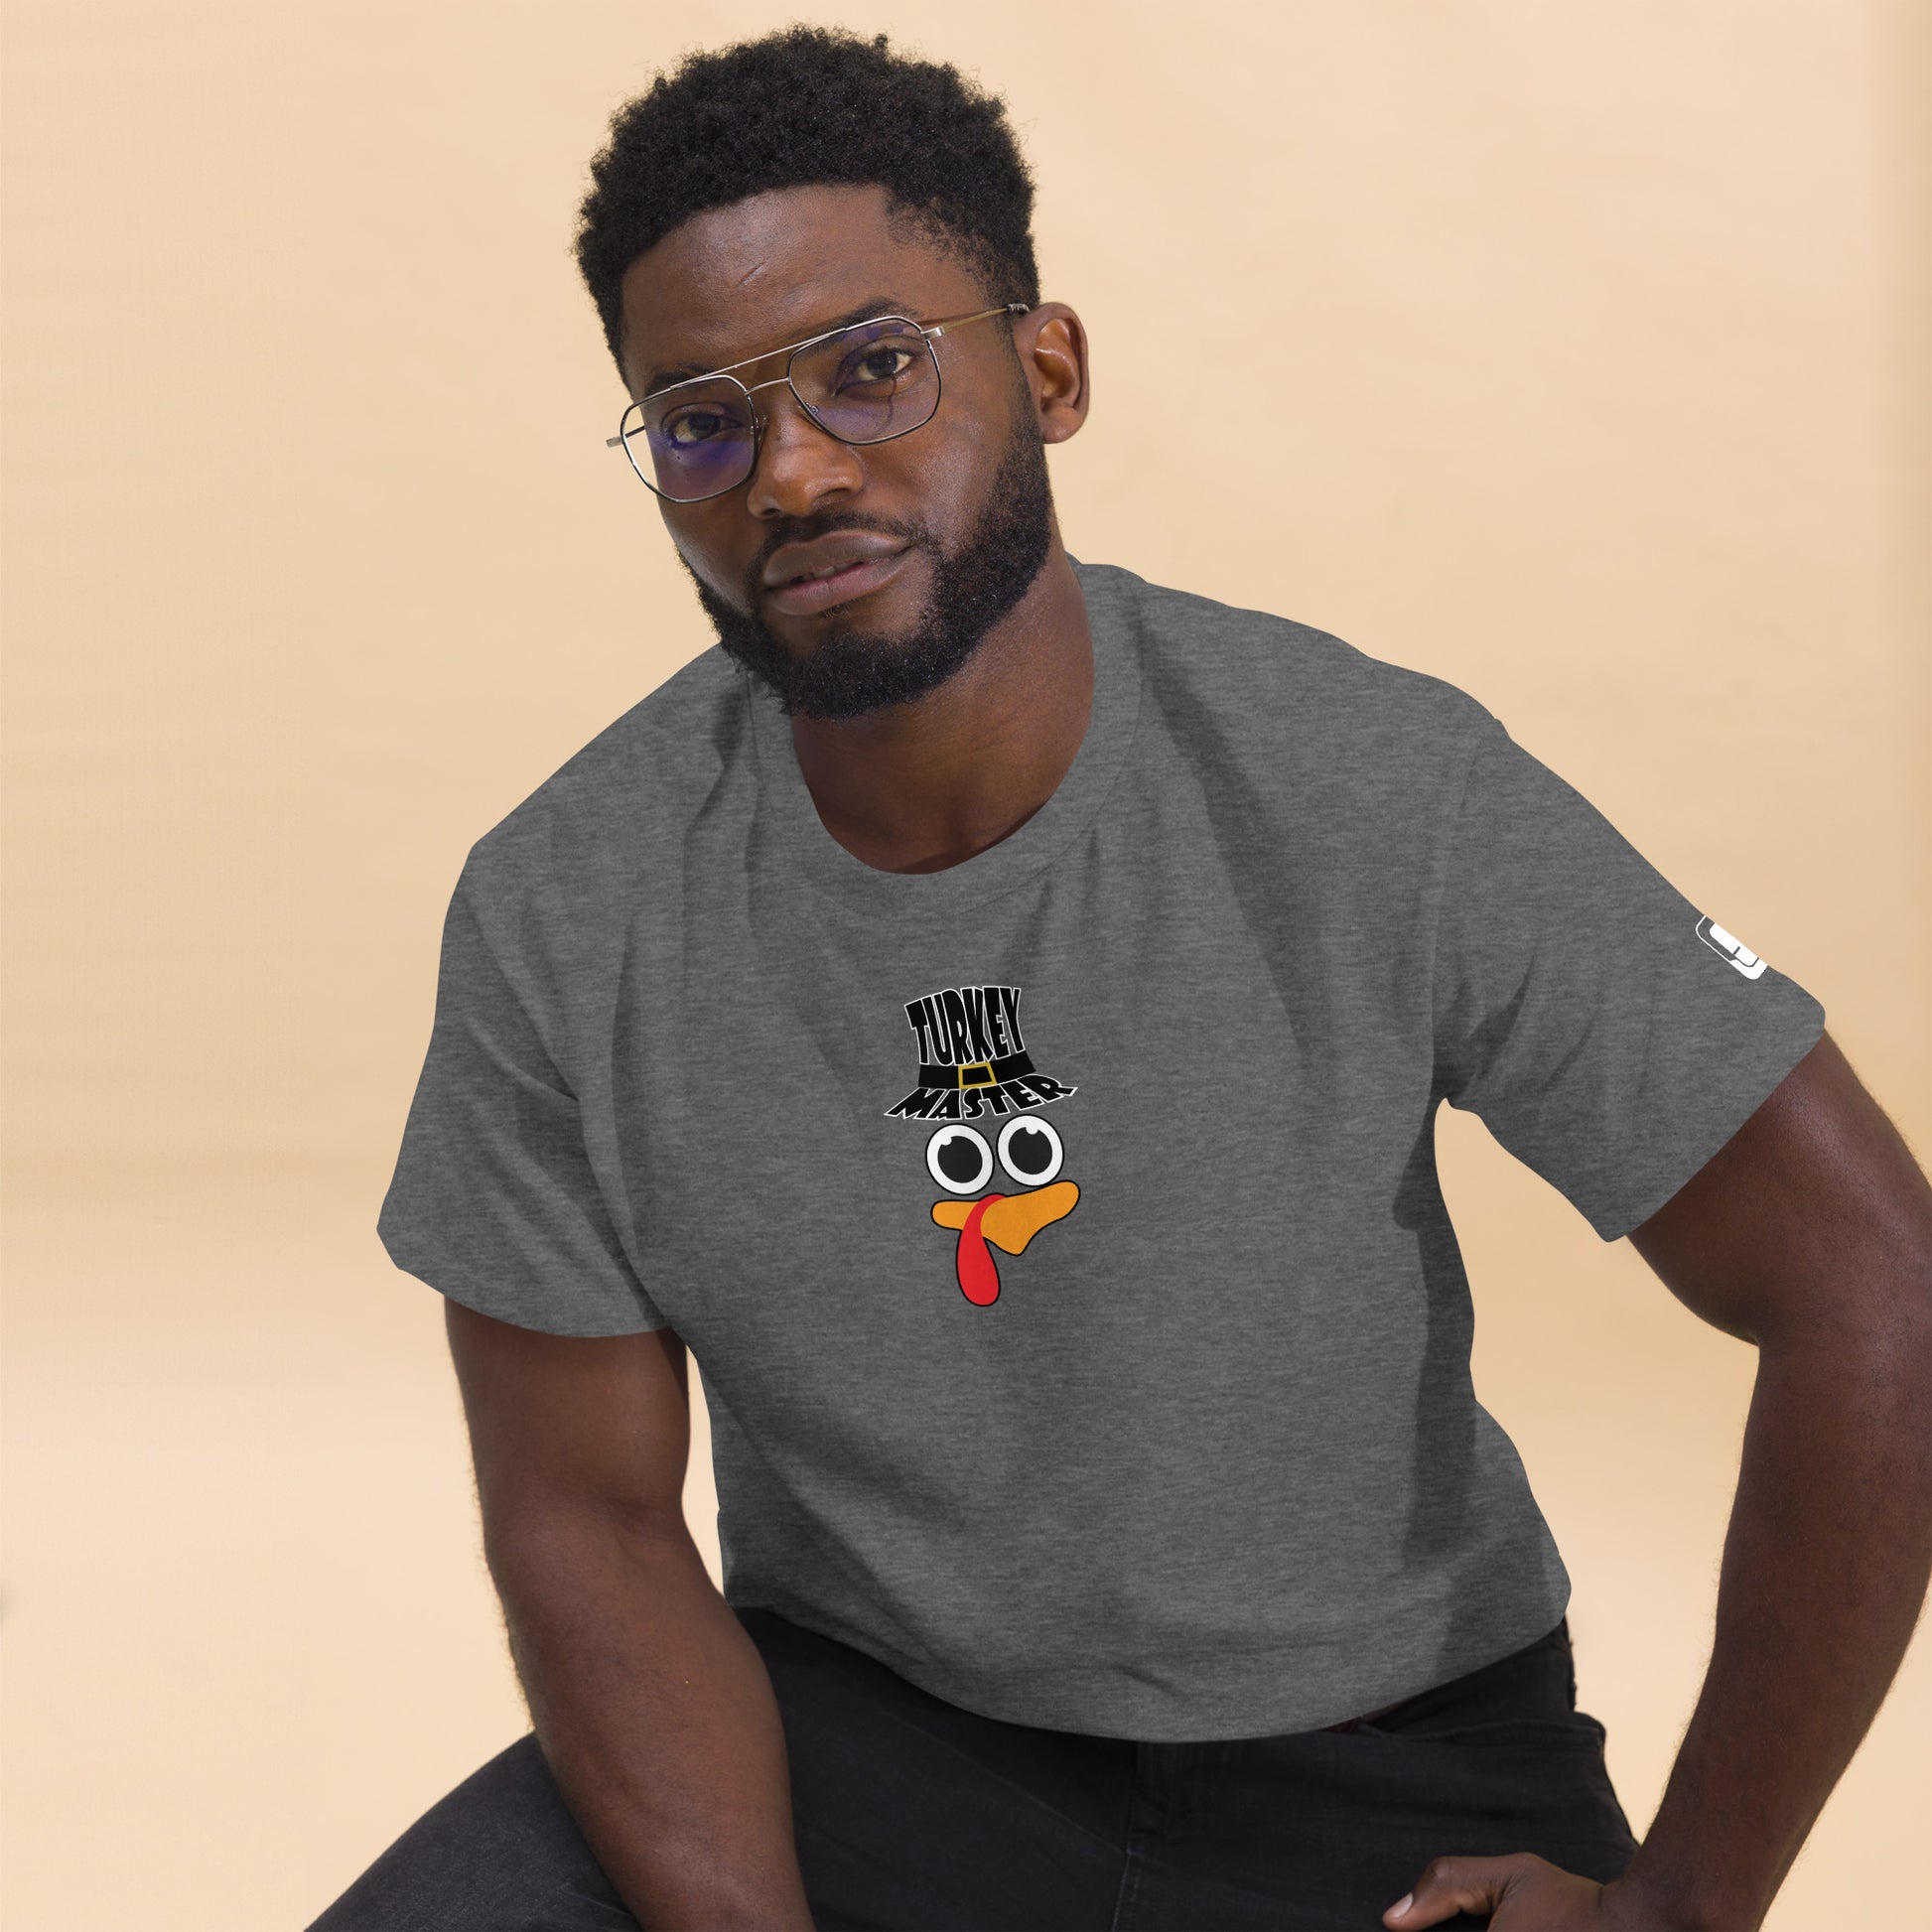 A man with a neatly trimmed beard and glasses is wearing a grey t-shirt featuring a playful turkey graphic. The turkey has cartoonish eyes, an orange beak, and a red snood, along with a black hat reading "TURKEY MASTER" in bold letters. The left sleeve includes a distinctive rectangular logo patch. The man is sitting casually against a neutral background, confidently smiling at the camera.